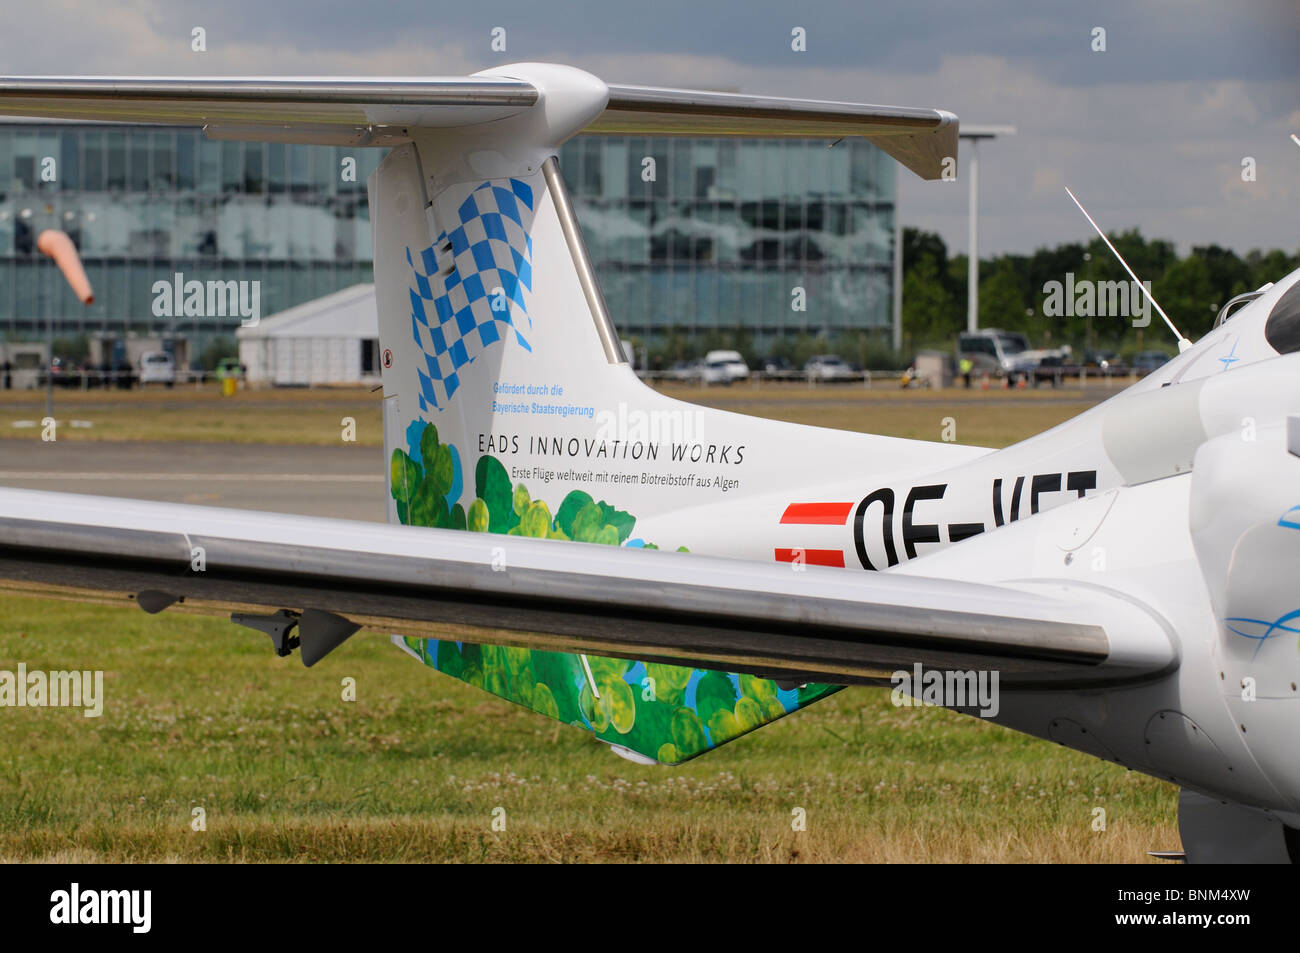 A Diamond DA 42 New Generation aircraft which flys on pure biofuel produced from algae on display at Farnborough Air Show UK Stock Photo